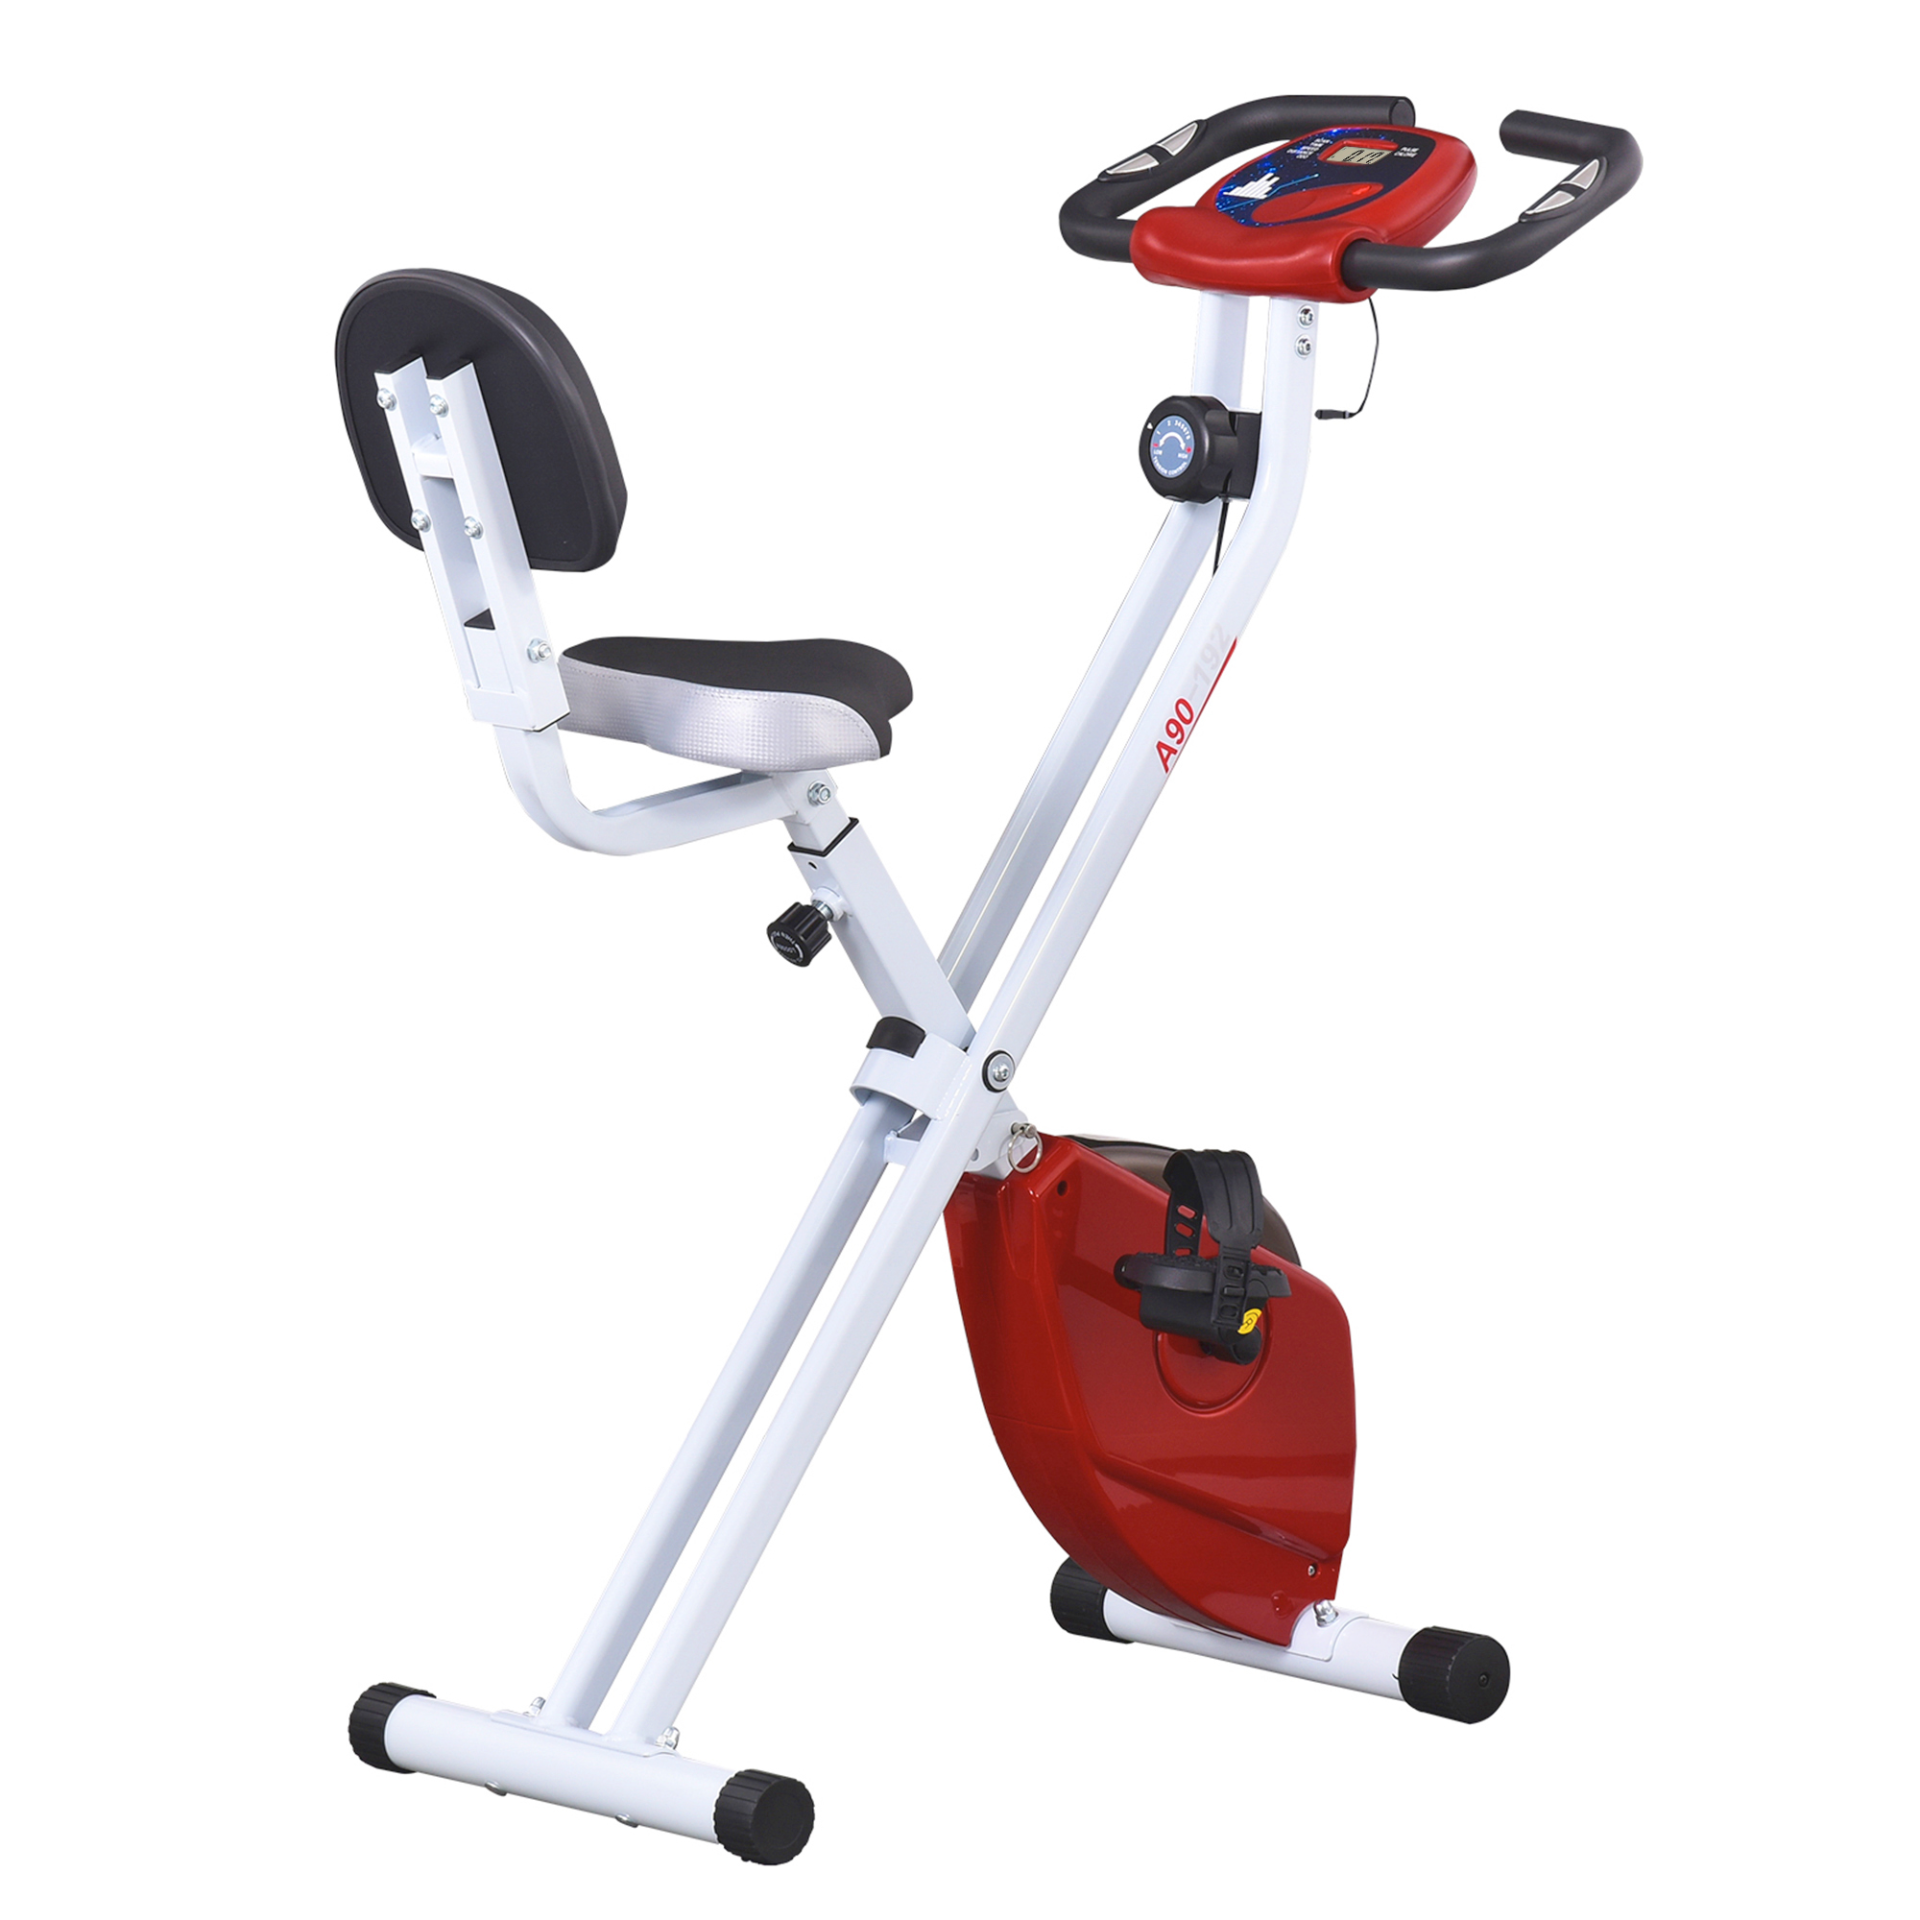 HOMCOM Exercise Bike Fitness Bicycle Indoor trainer Foldable 8-level Magnetic Re